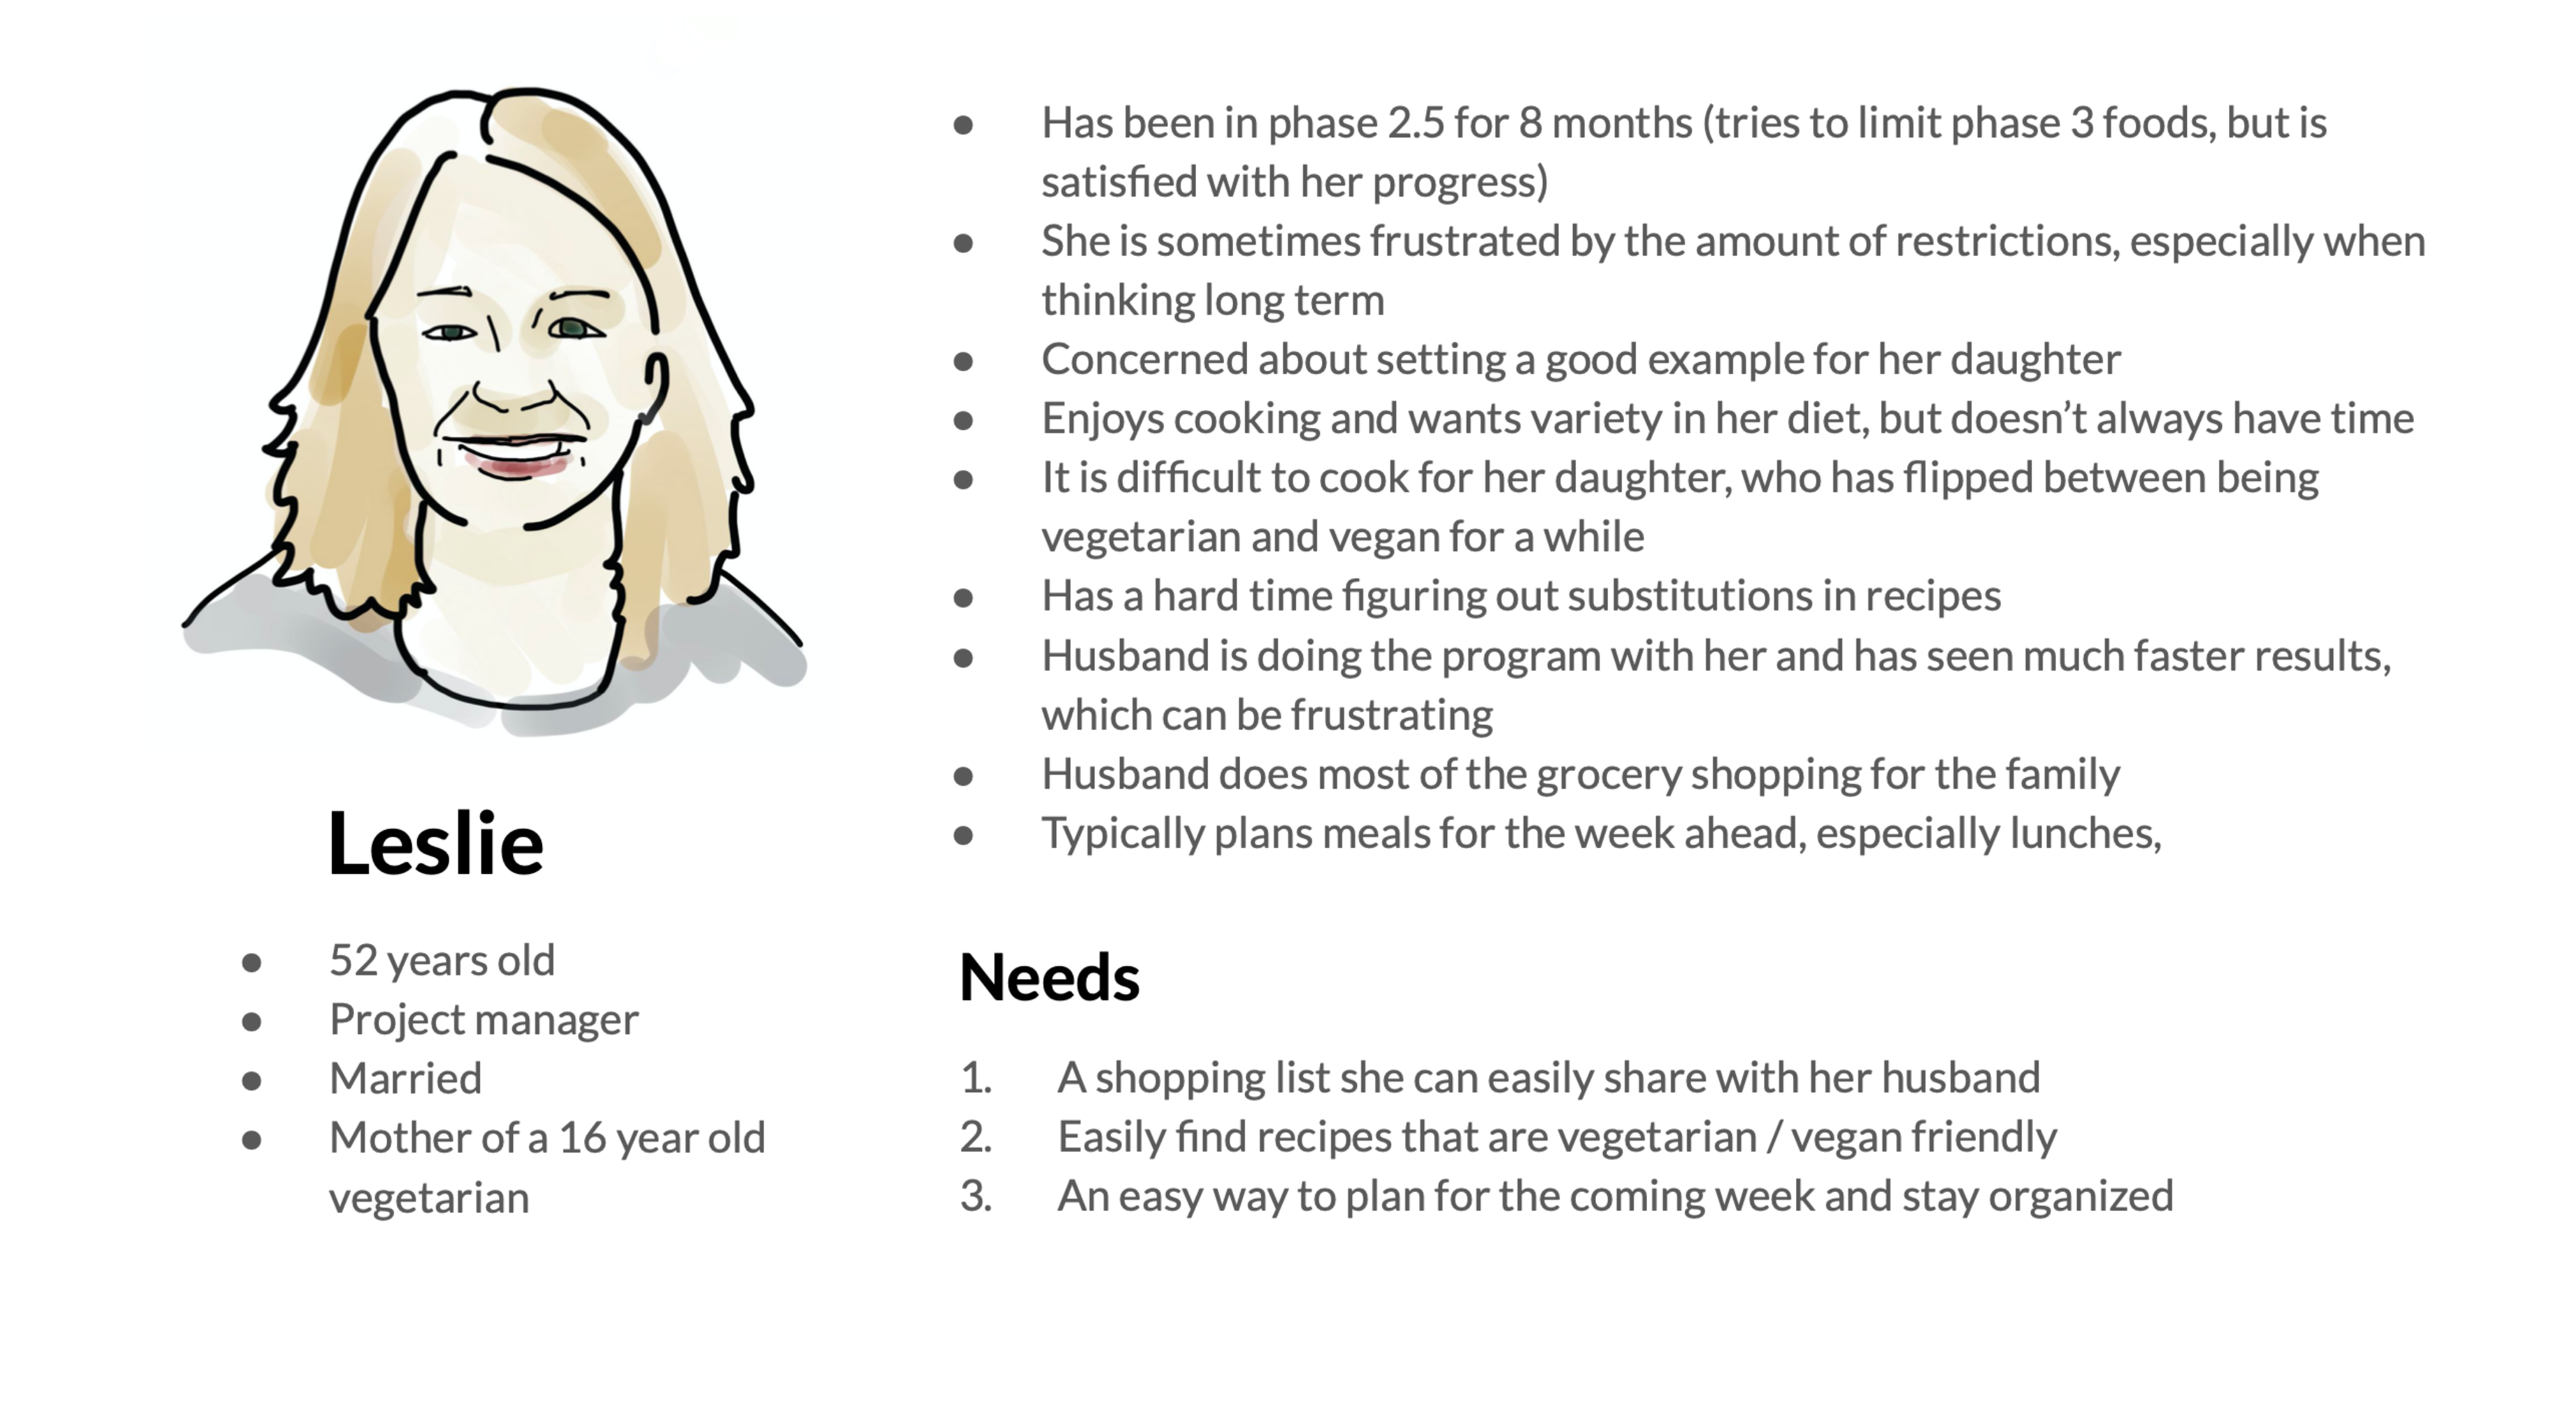 Persona for Leslia. She is 52 years old, Project manager, Married, Mother of a 16 year old vegetarian. She is sometimes frustrated by the restrictions and has a hard time cooking for her daughter, but wants to set a good example. She needs ways to expand her repetoire of recipes that are compliant.